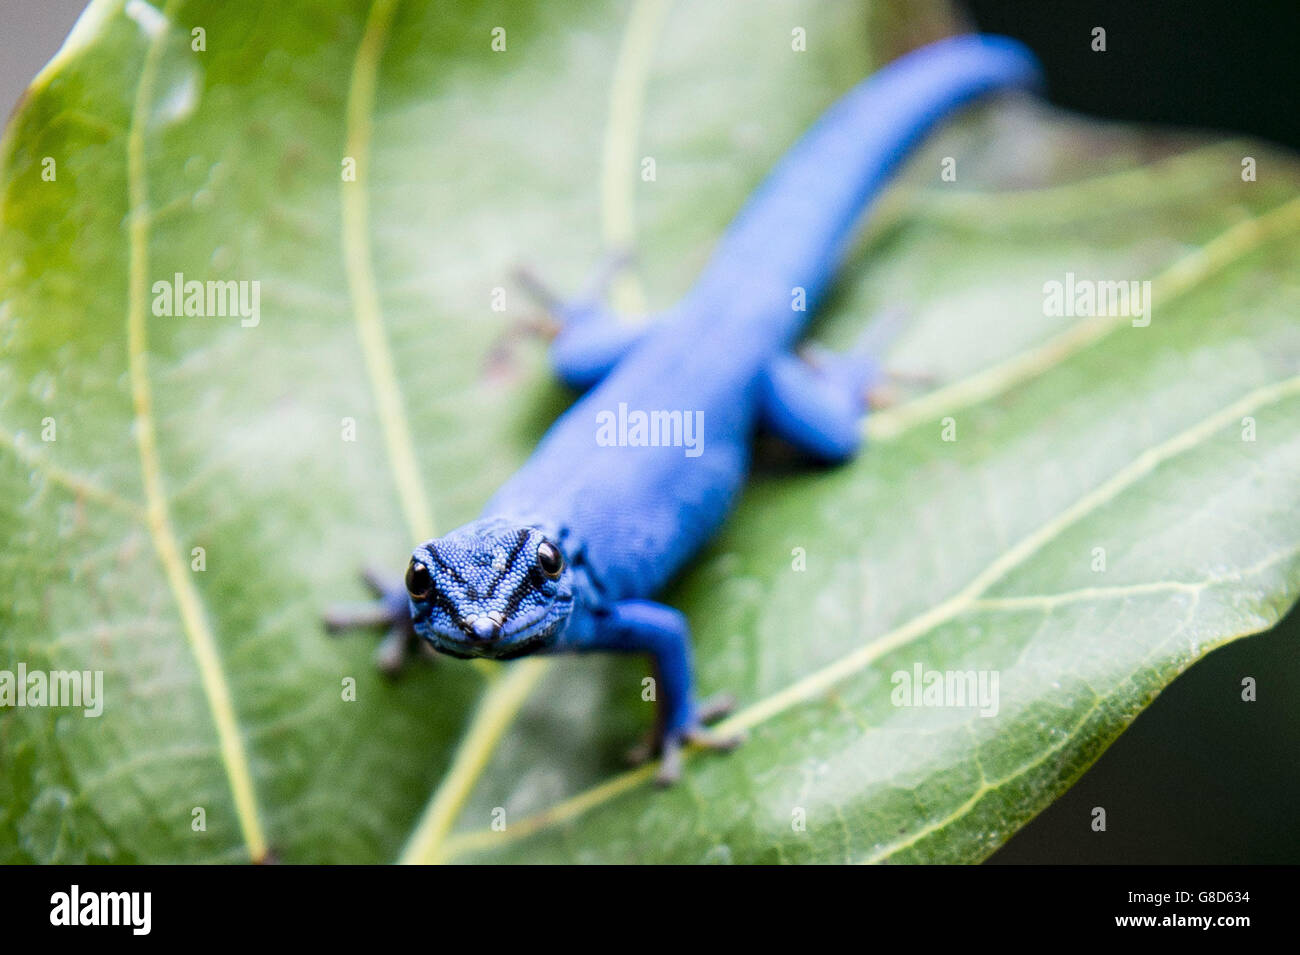 A critically endangered electric blue gecko sits on a leaf at Bristol Zoo, where one of around 165 of the rare breeds have been rescued and re-homed after they were smuggled into the country via Heathrow airport from Tanzania, believed to be destined for the pet trade. Stock Photo